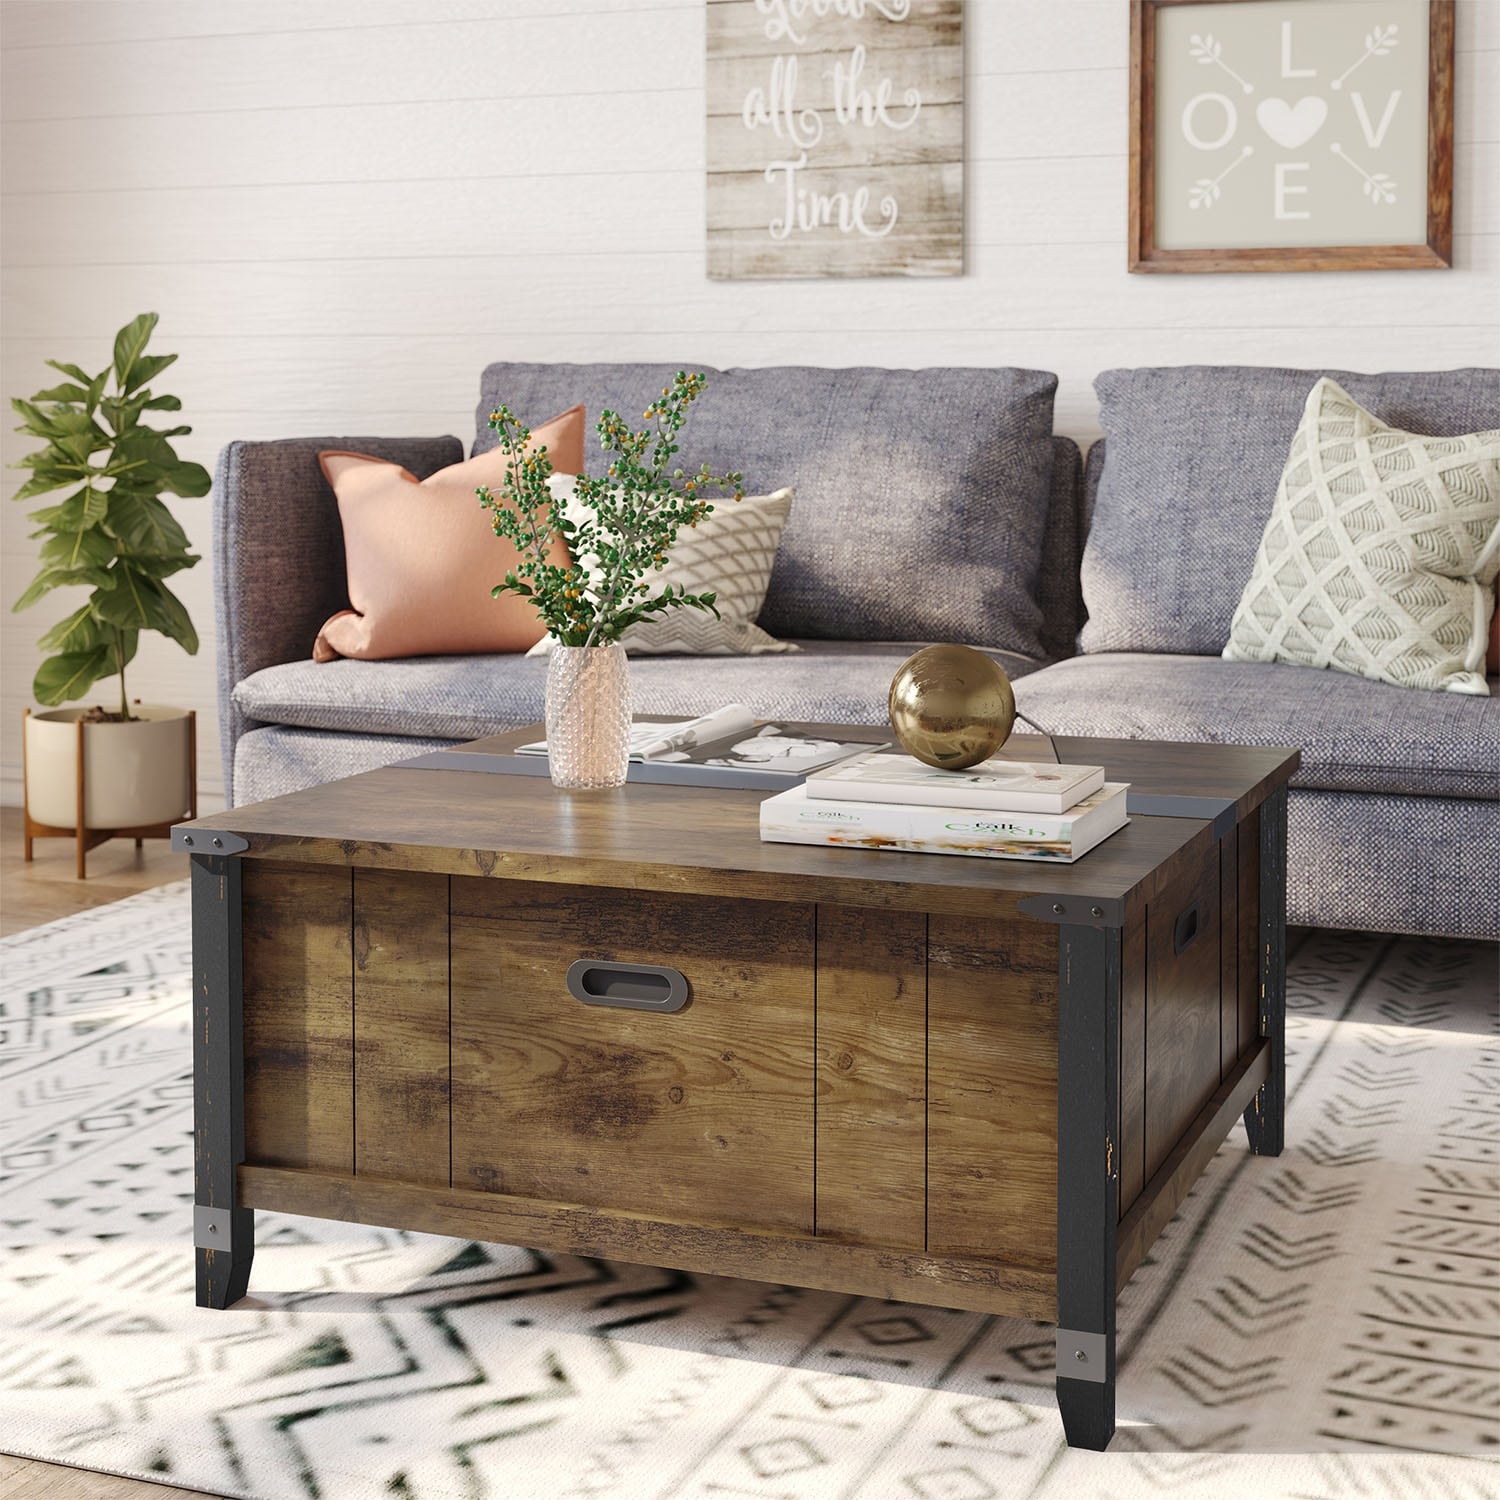 https://ak1.ostkcdn.com/images/products/is/images/direct/297e23b763acc61b2504f3bbf0e6af005bebe5e4/Farmhouse-Lift-Top-Square-Coffee-Table-with-Storage.jpg